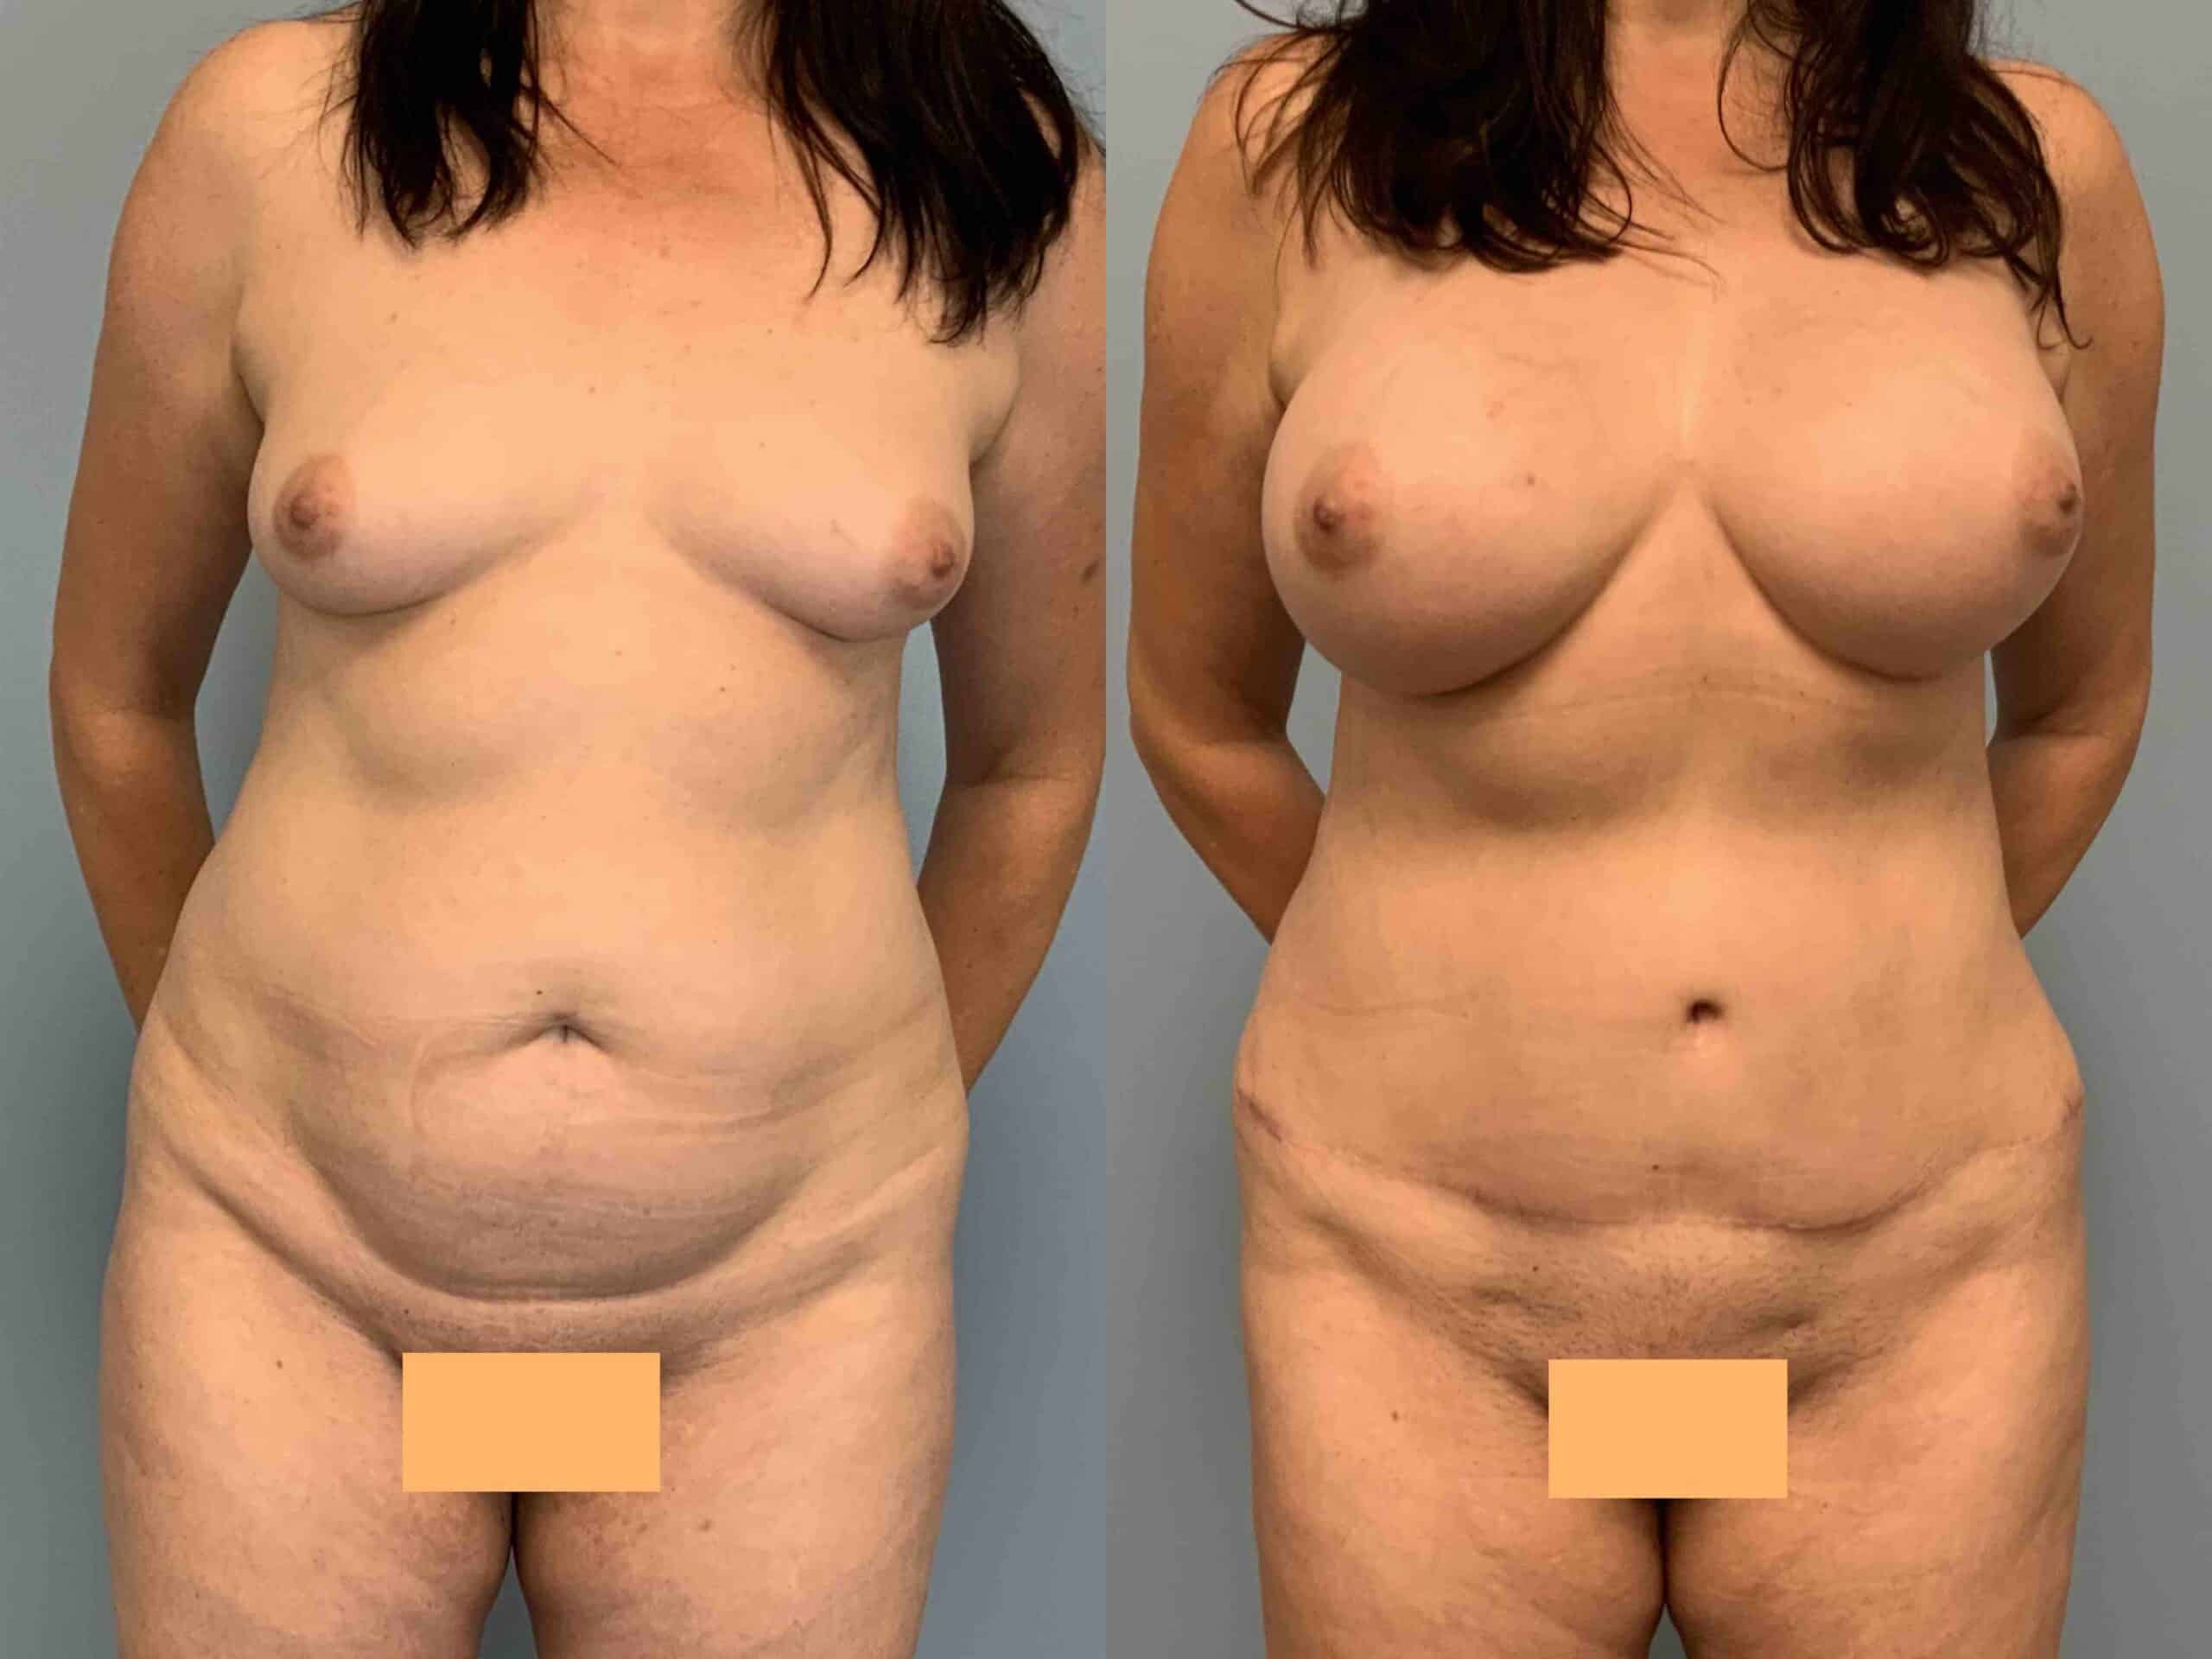 Before and after, patient 1 yr post op from VASER Renuvion Abdomen, Tummy Tuck, Flanks, Mons Thighs, Brazilian Butt Lift, Breast Augmentation, Level III Muscle Release procedures performed by Dr. Paul Vanek